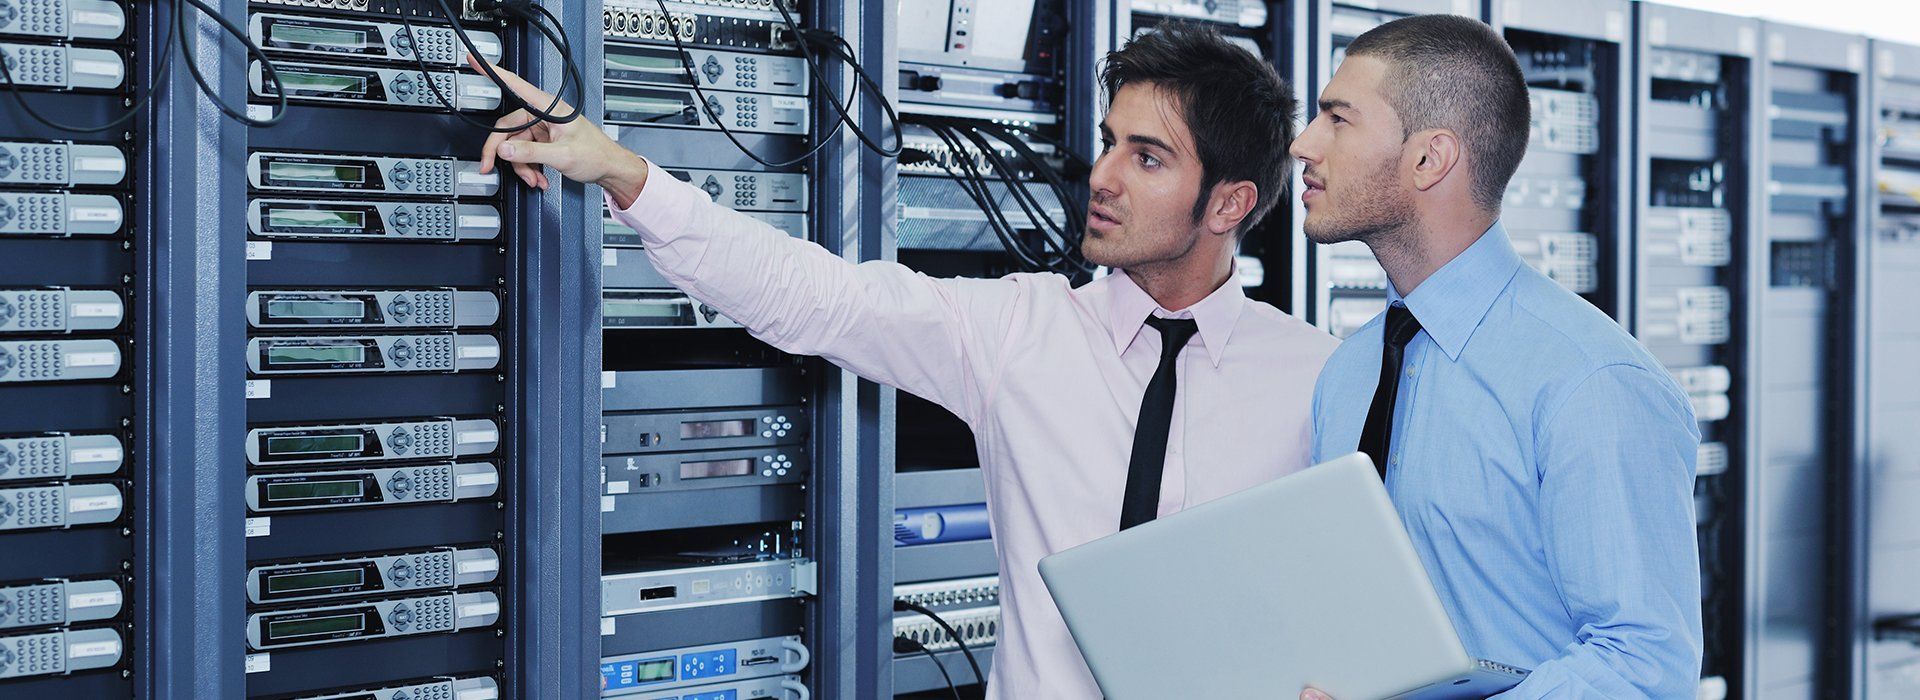 sage server and networking infrastructure